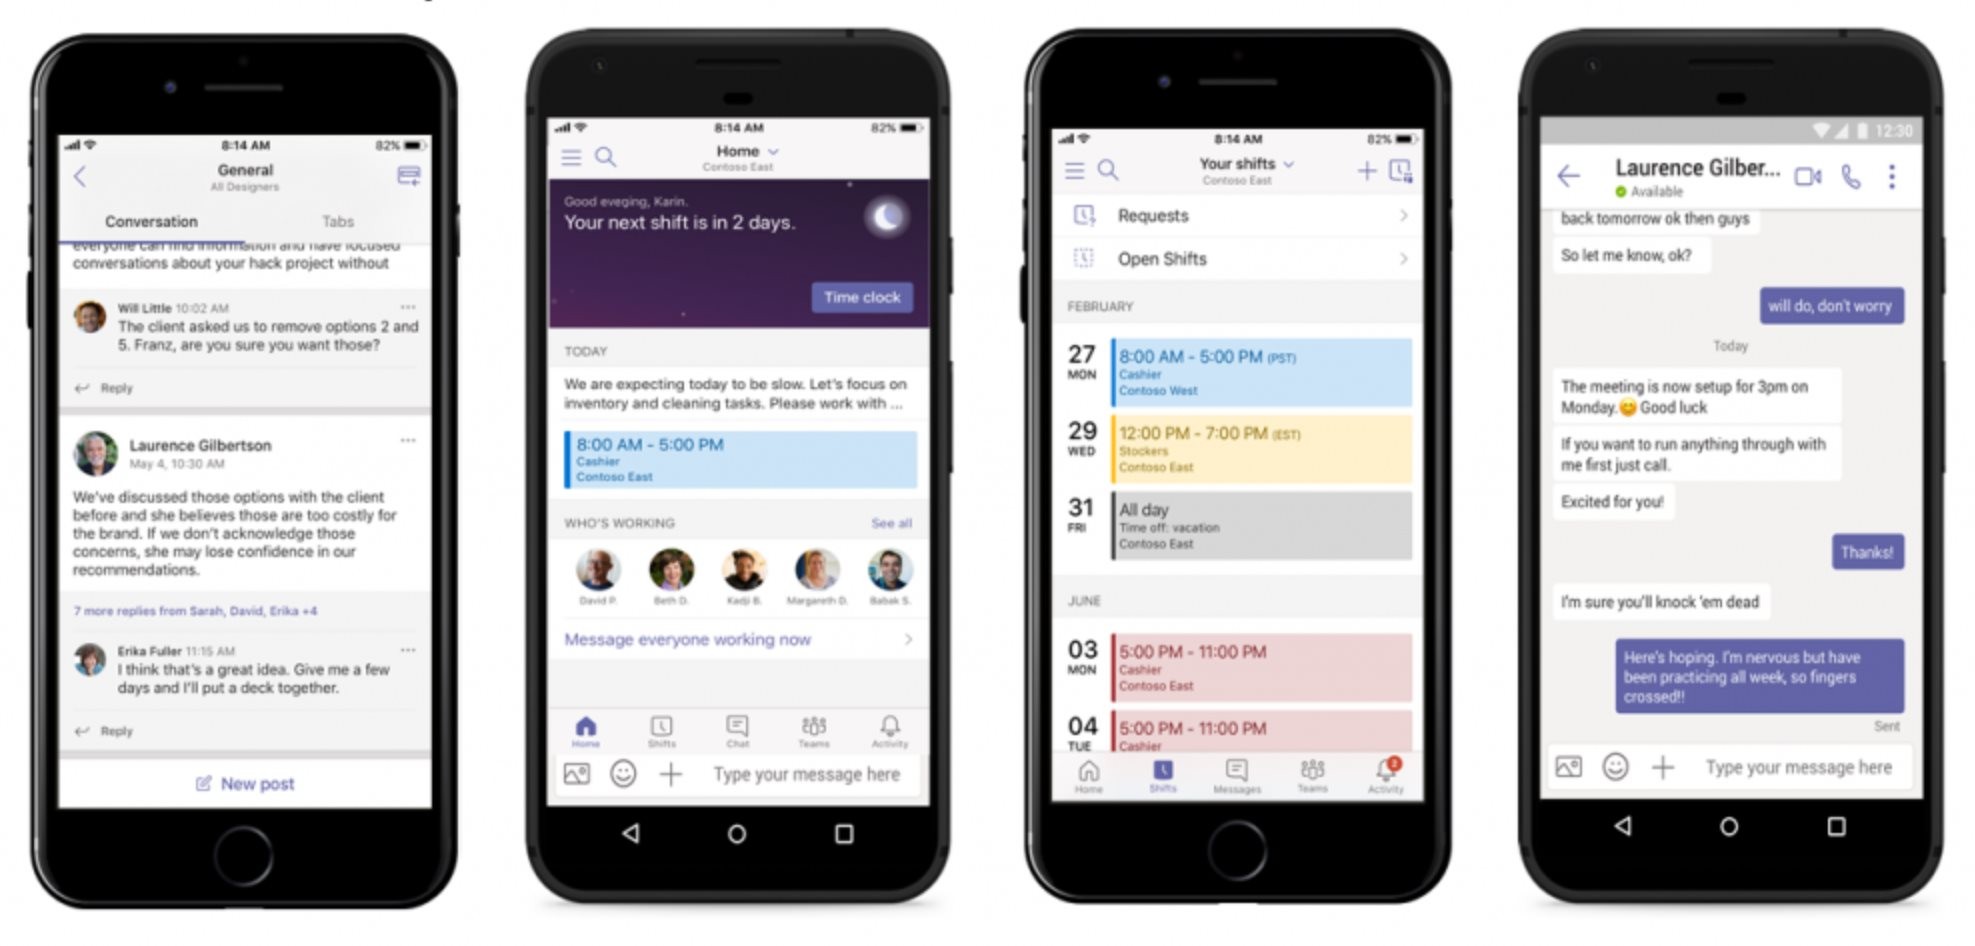 how to download microsoft teams on iphone